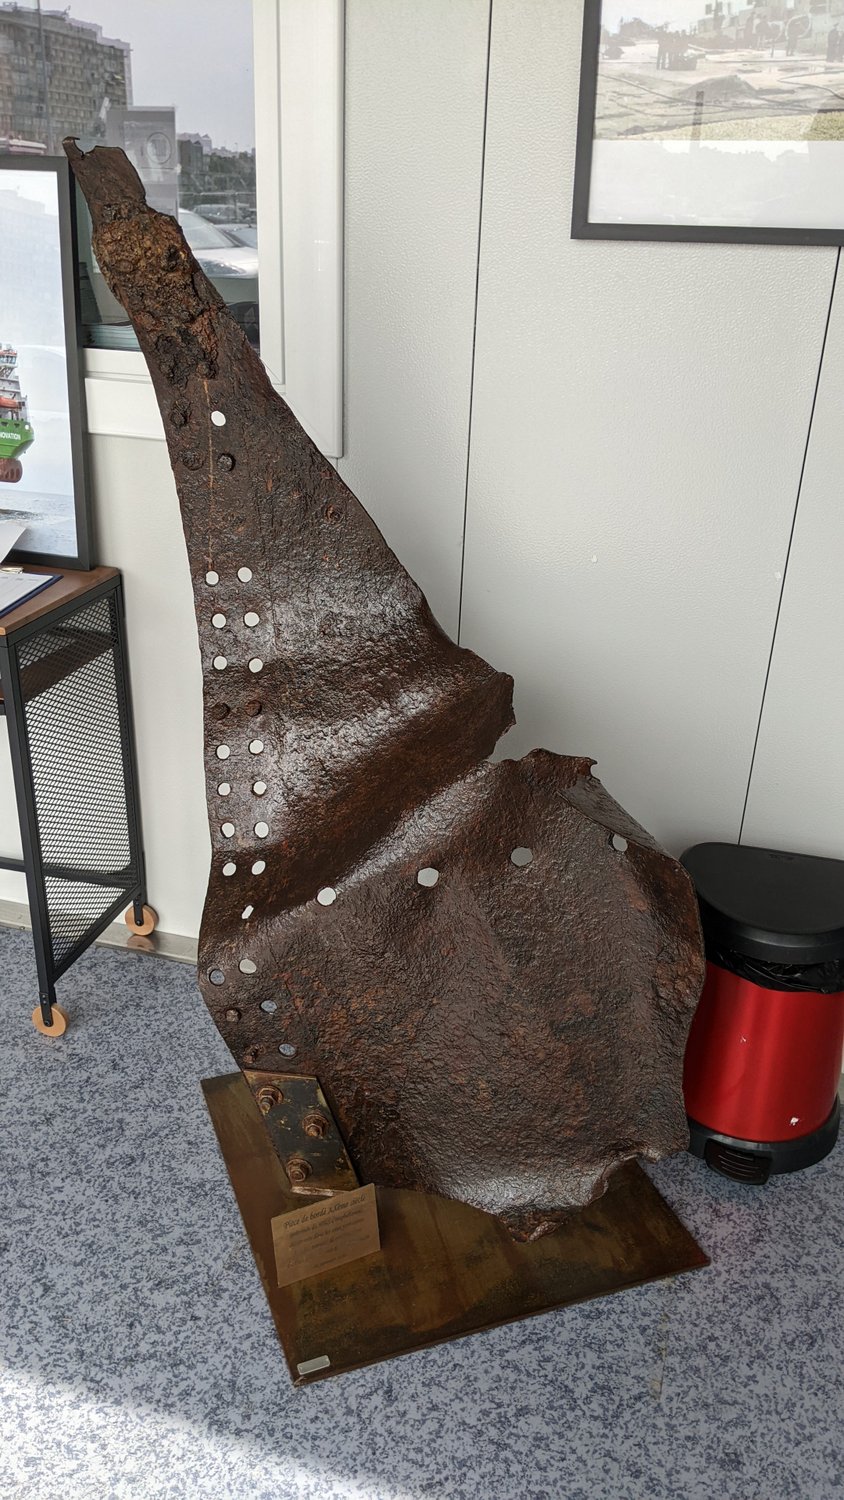 A jagged piece of bronze coloured metal about 1.2m high